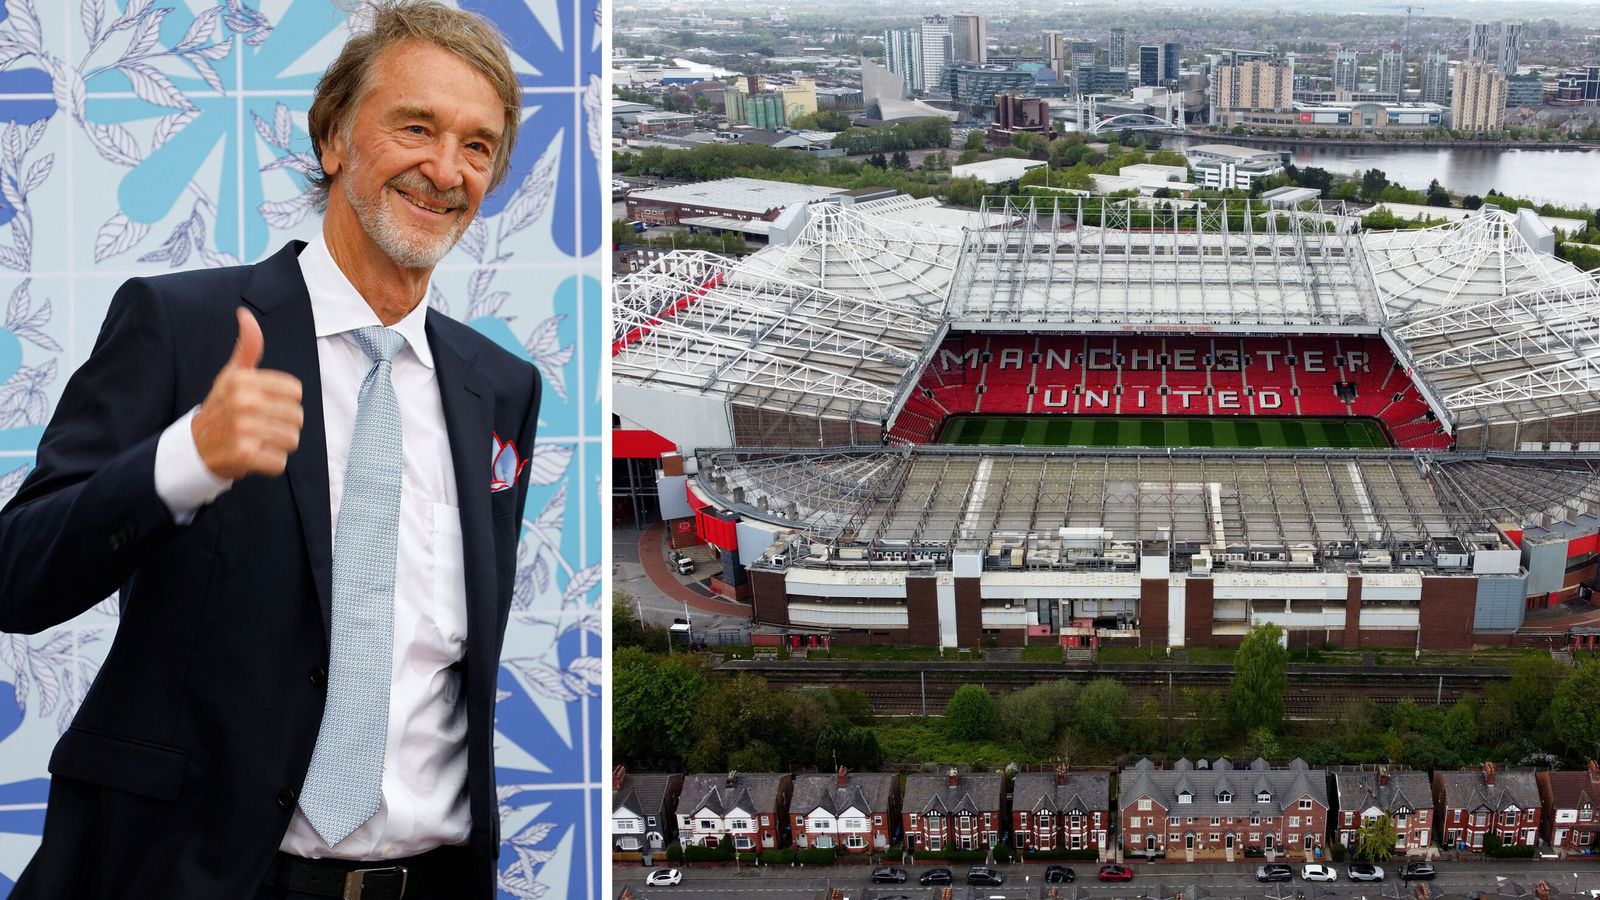 Billionaire Sir Jim Ratcliffe confirms interest in buying Manchester United